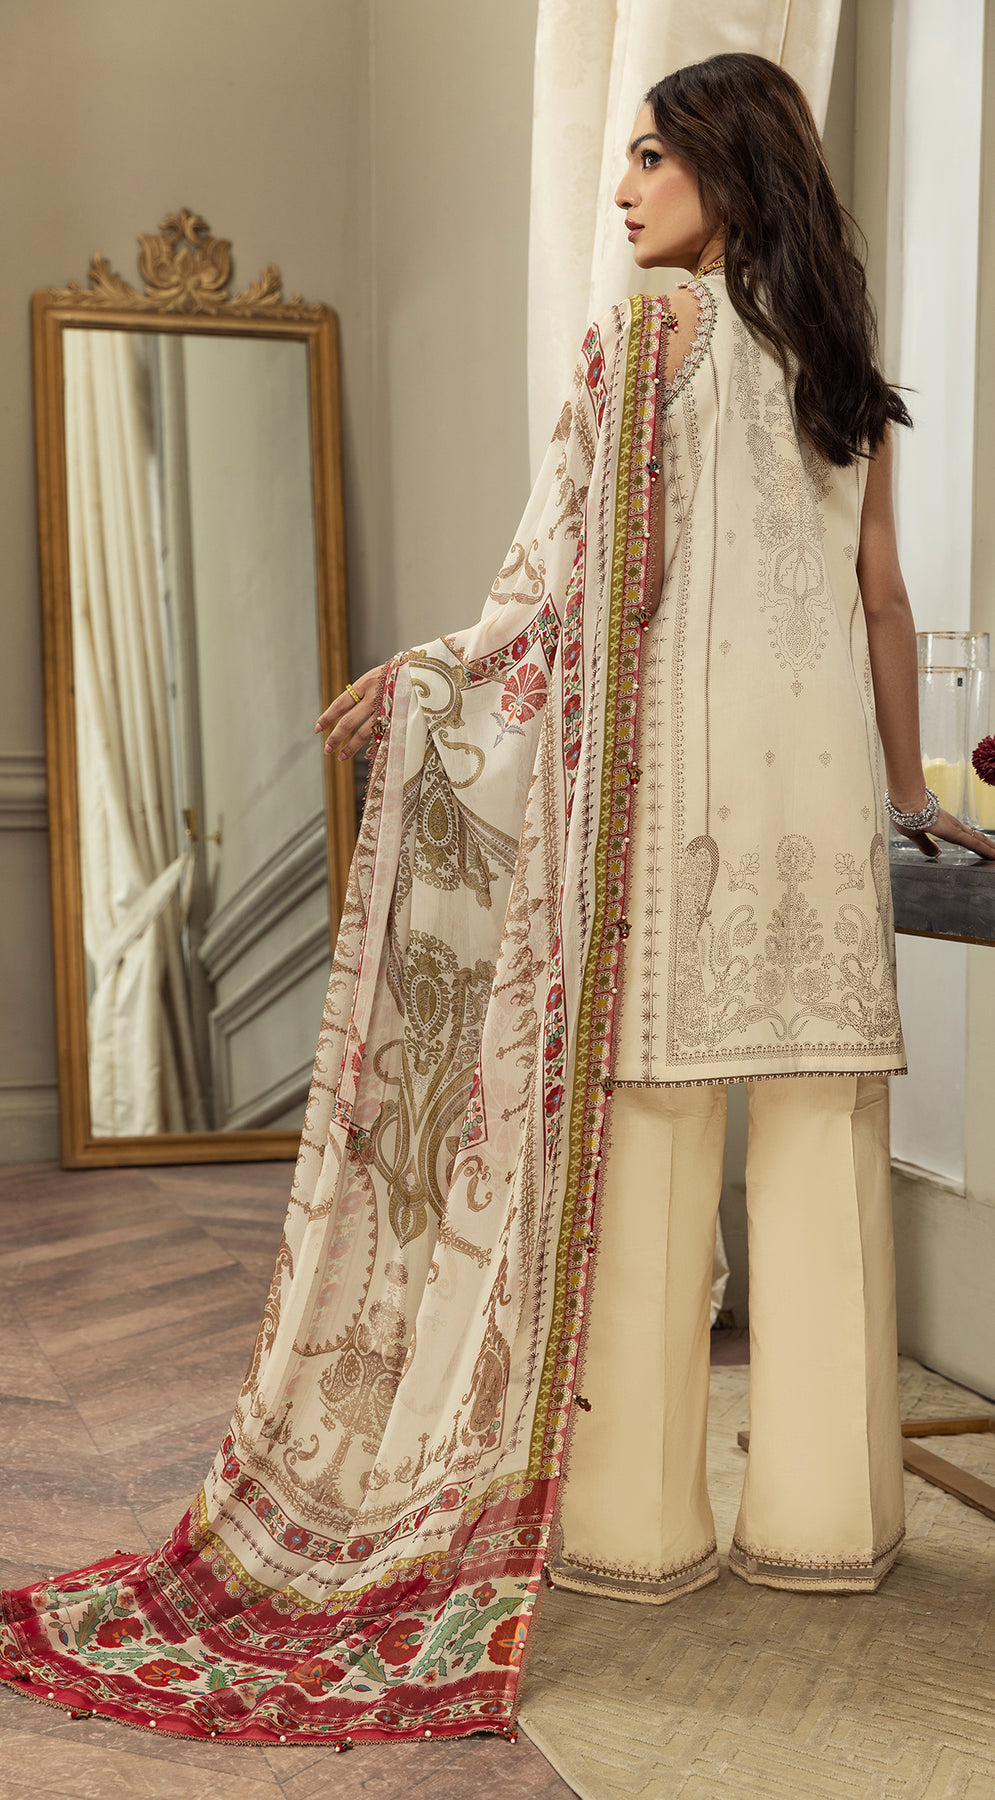 Anaya 3 Piece Unstitched Embroidered Suit - AL23-20-MANAL